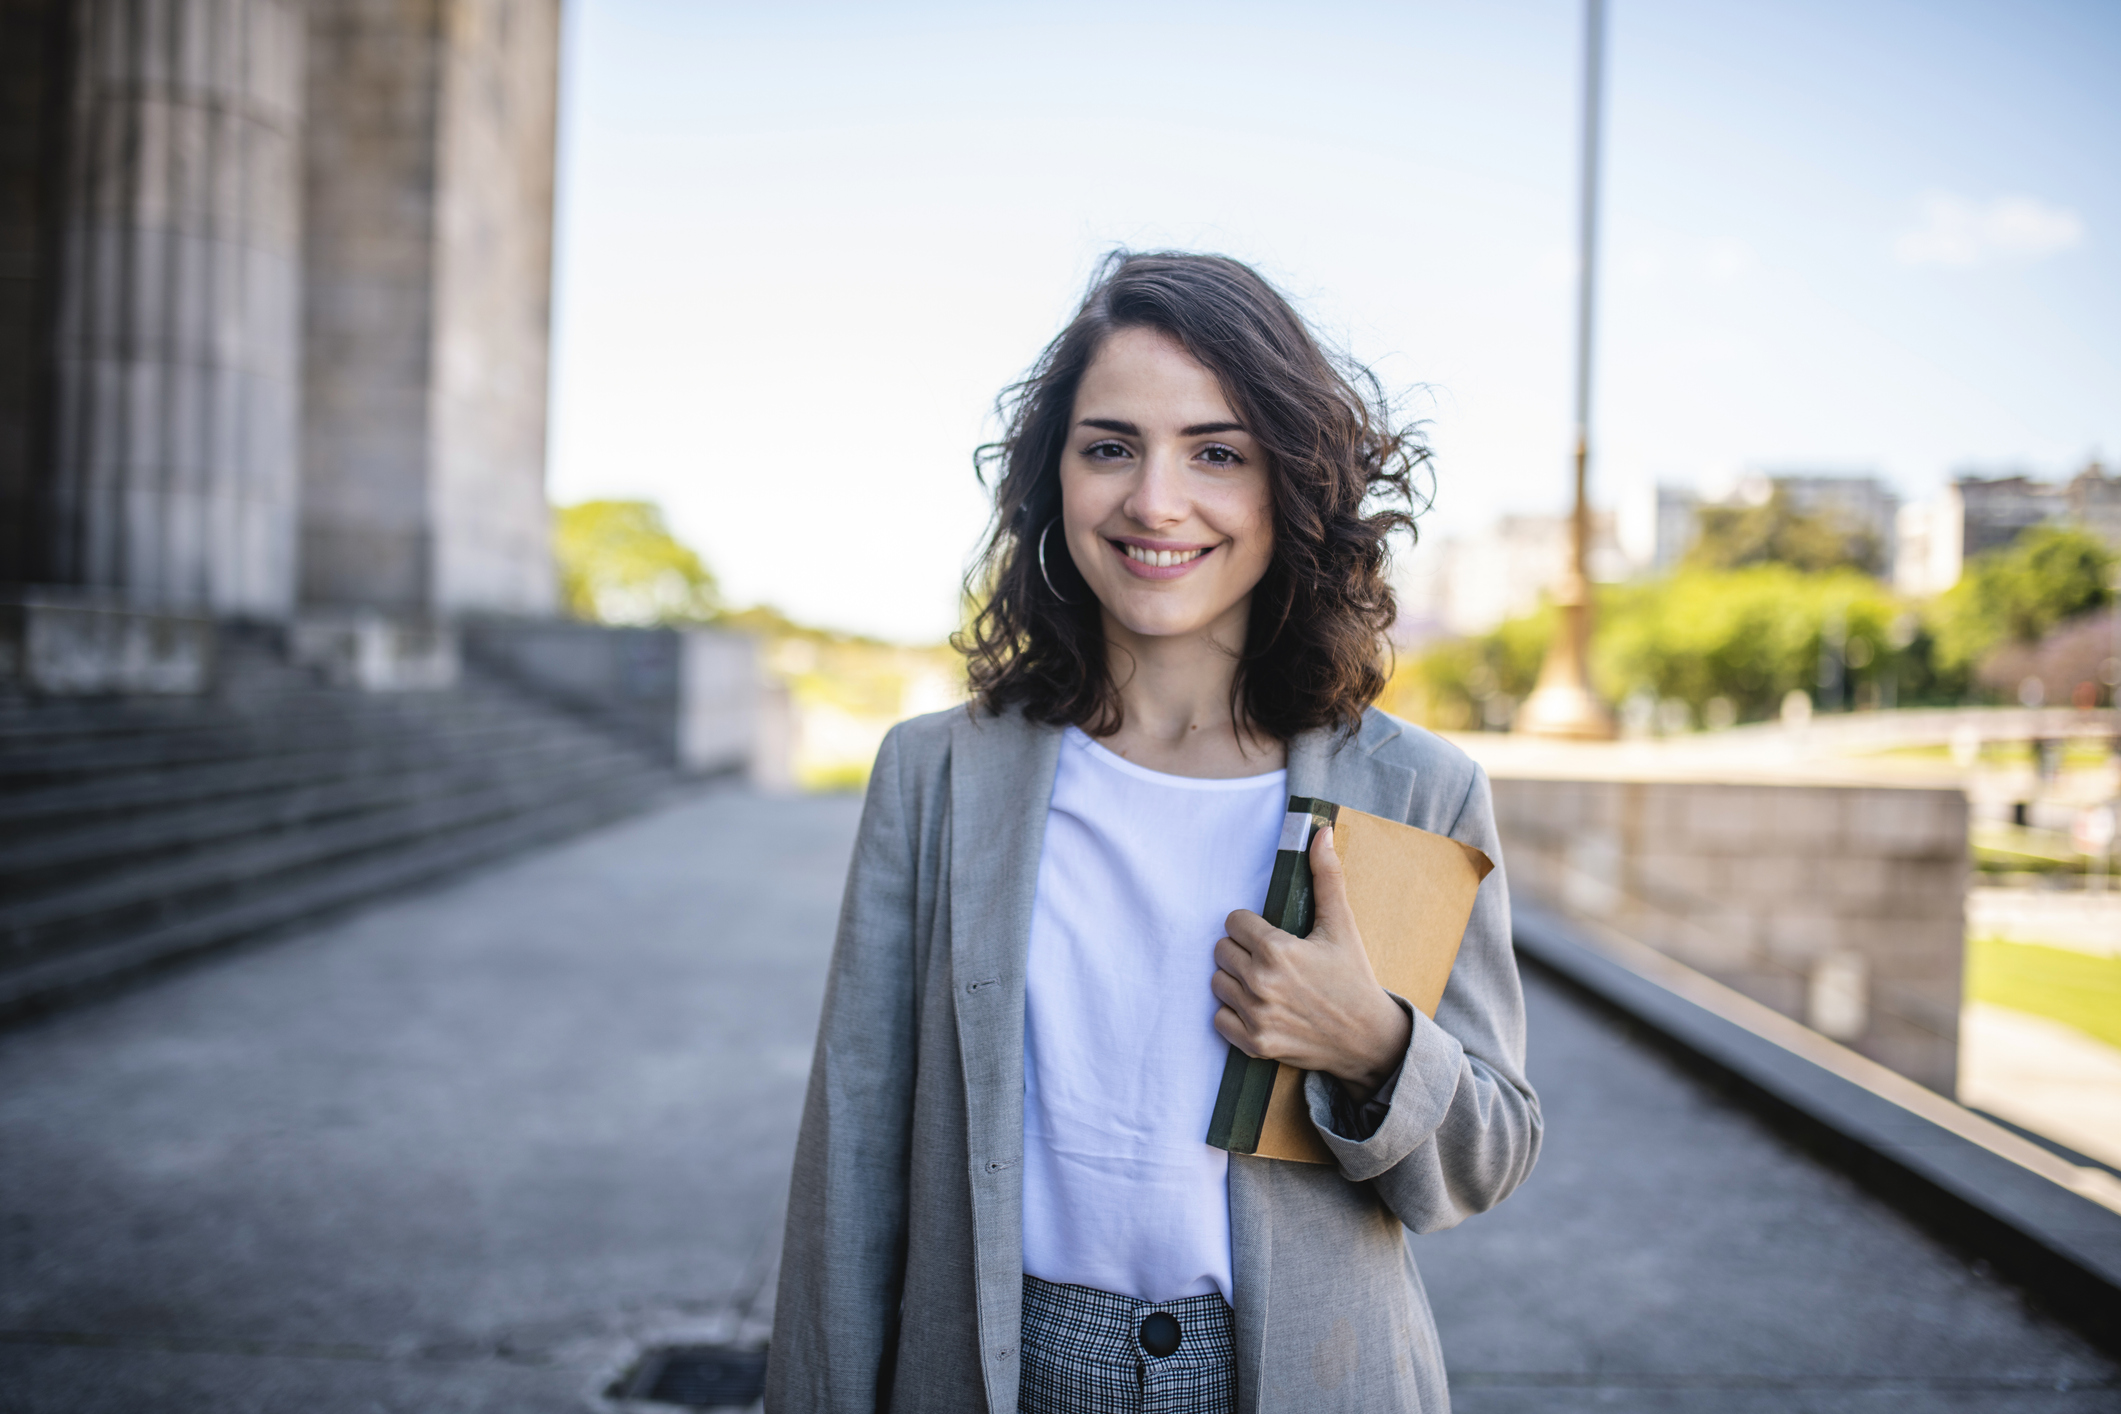 Female smiling holding a book infront of bulding